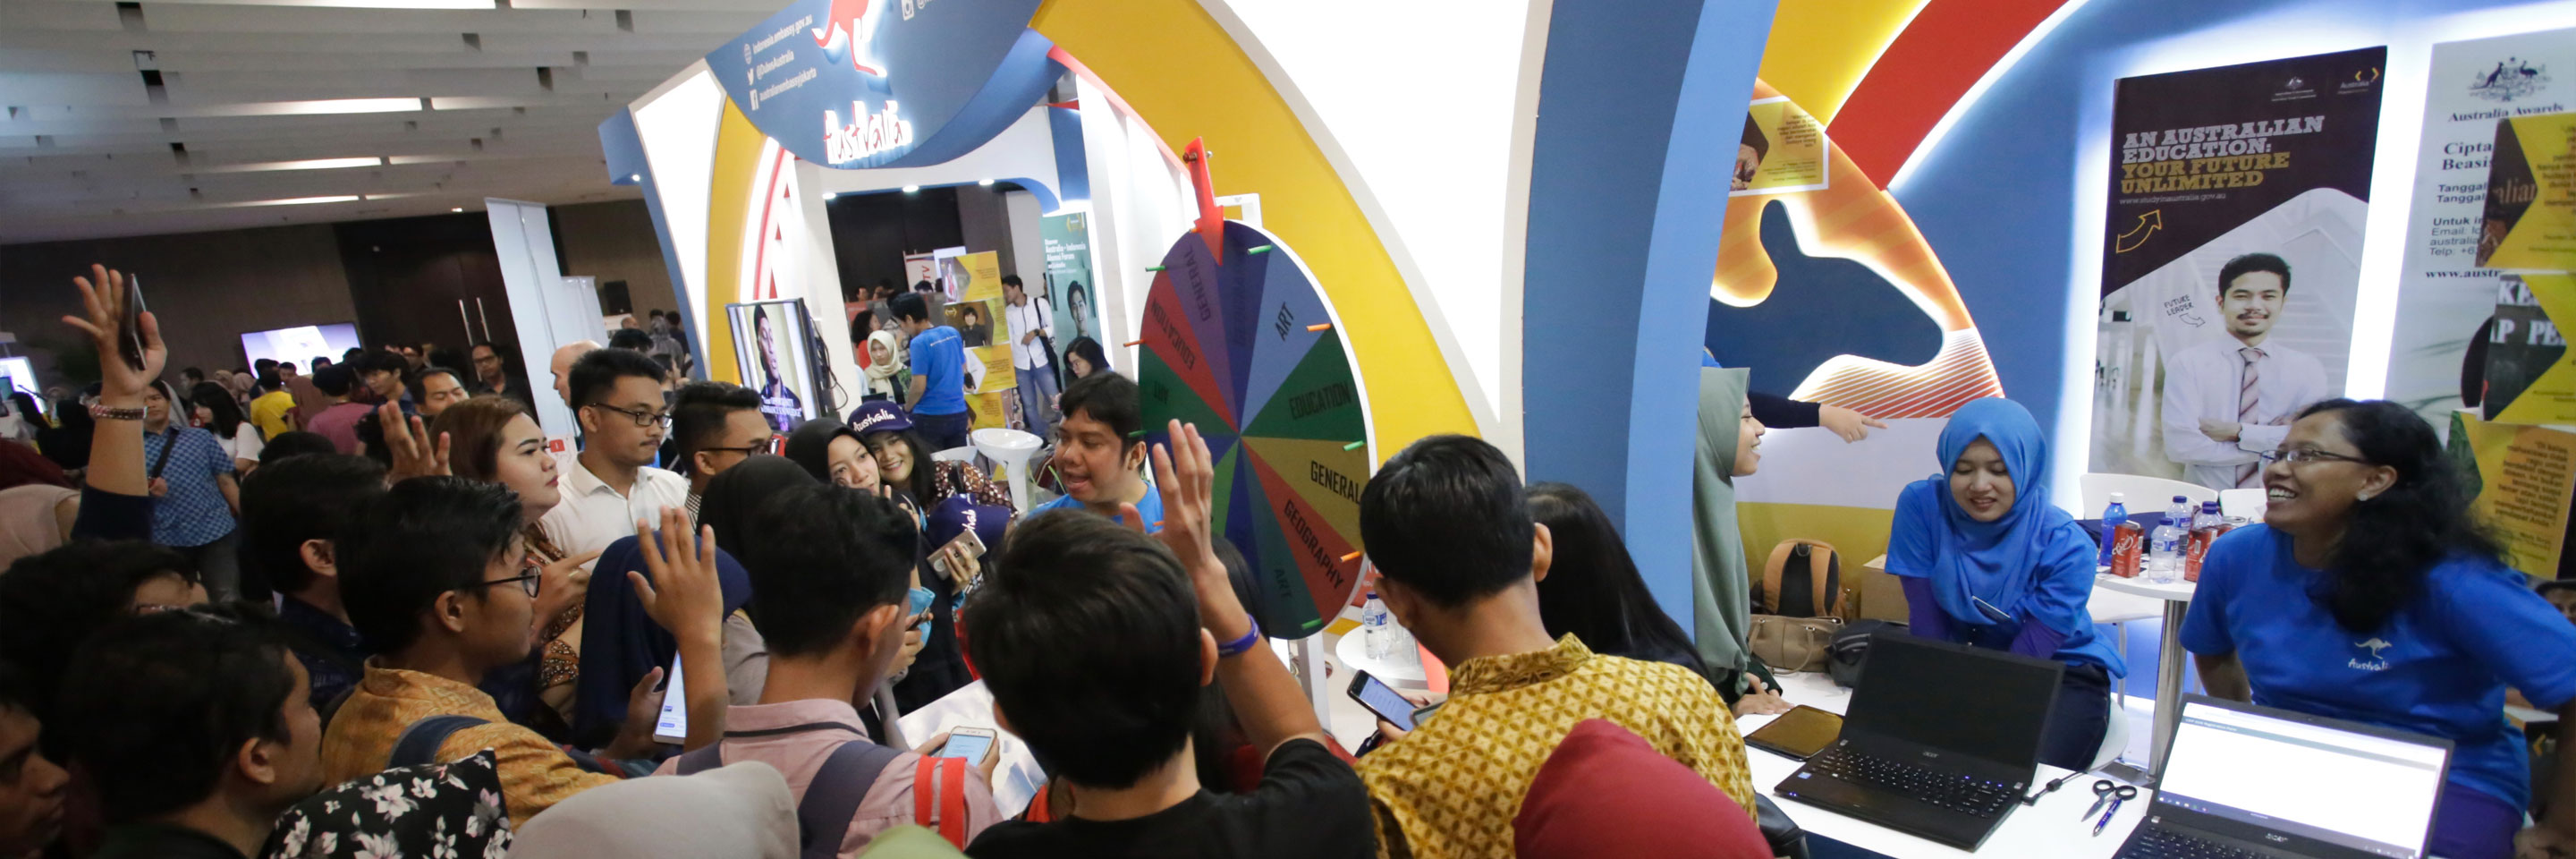 Nearly 2000 people visit the Australian Embassy booth at the recent Conference on Indonesian Foreign Policy (CIFP), and show their interest in the education, culture, and tourism of Australia as well as Australia Awards Scholarships.